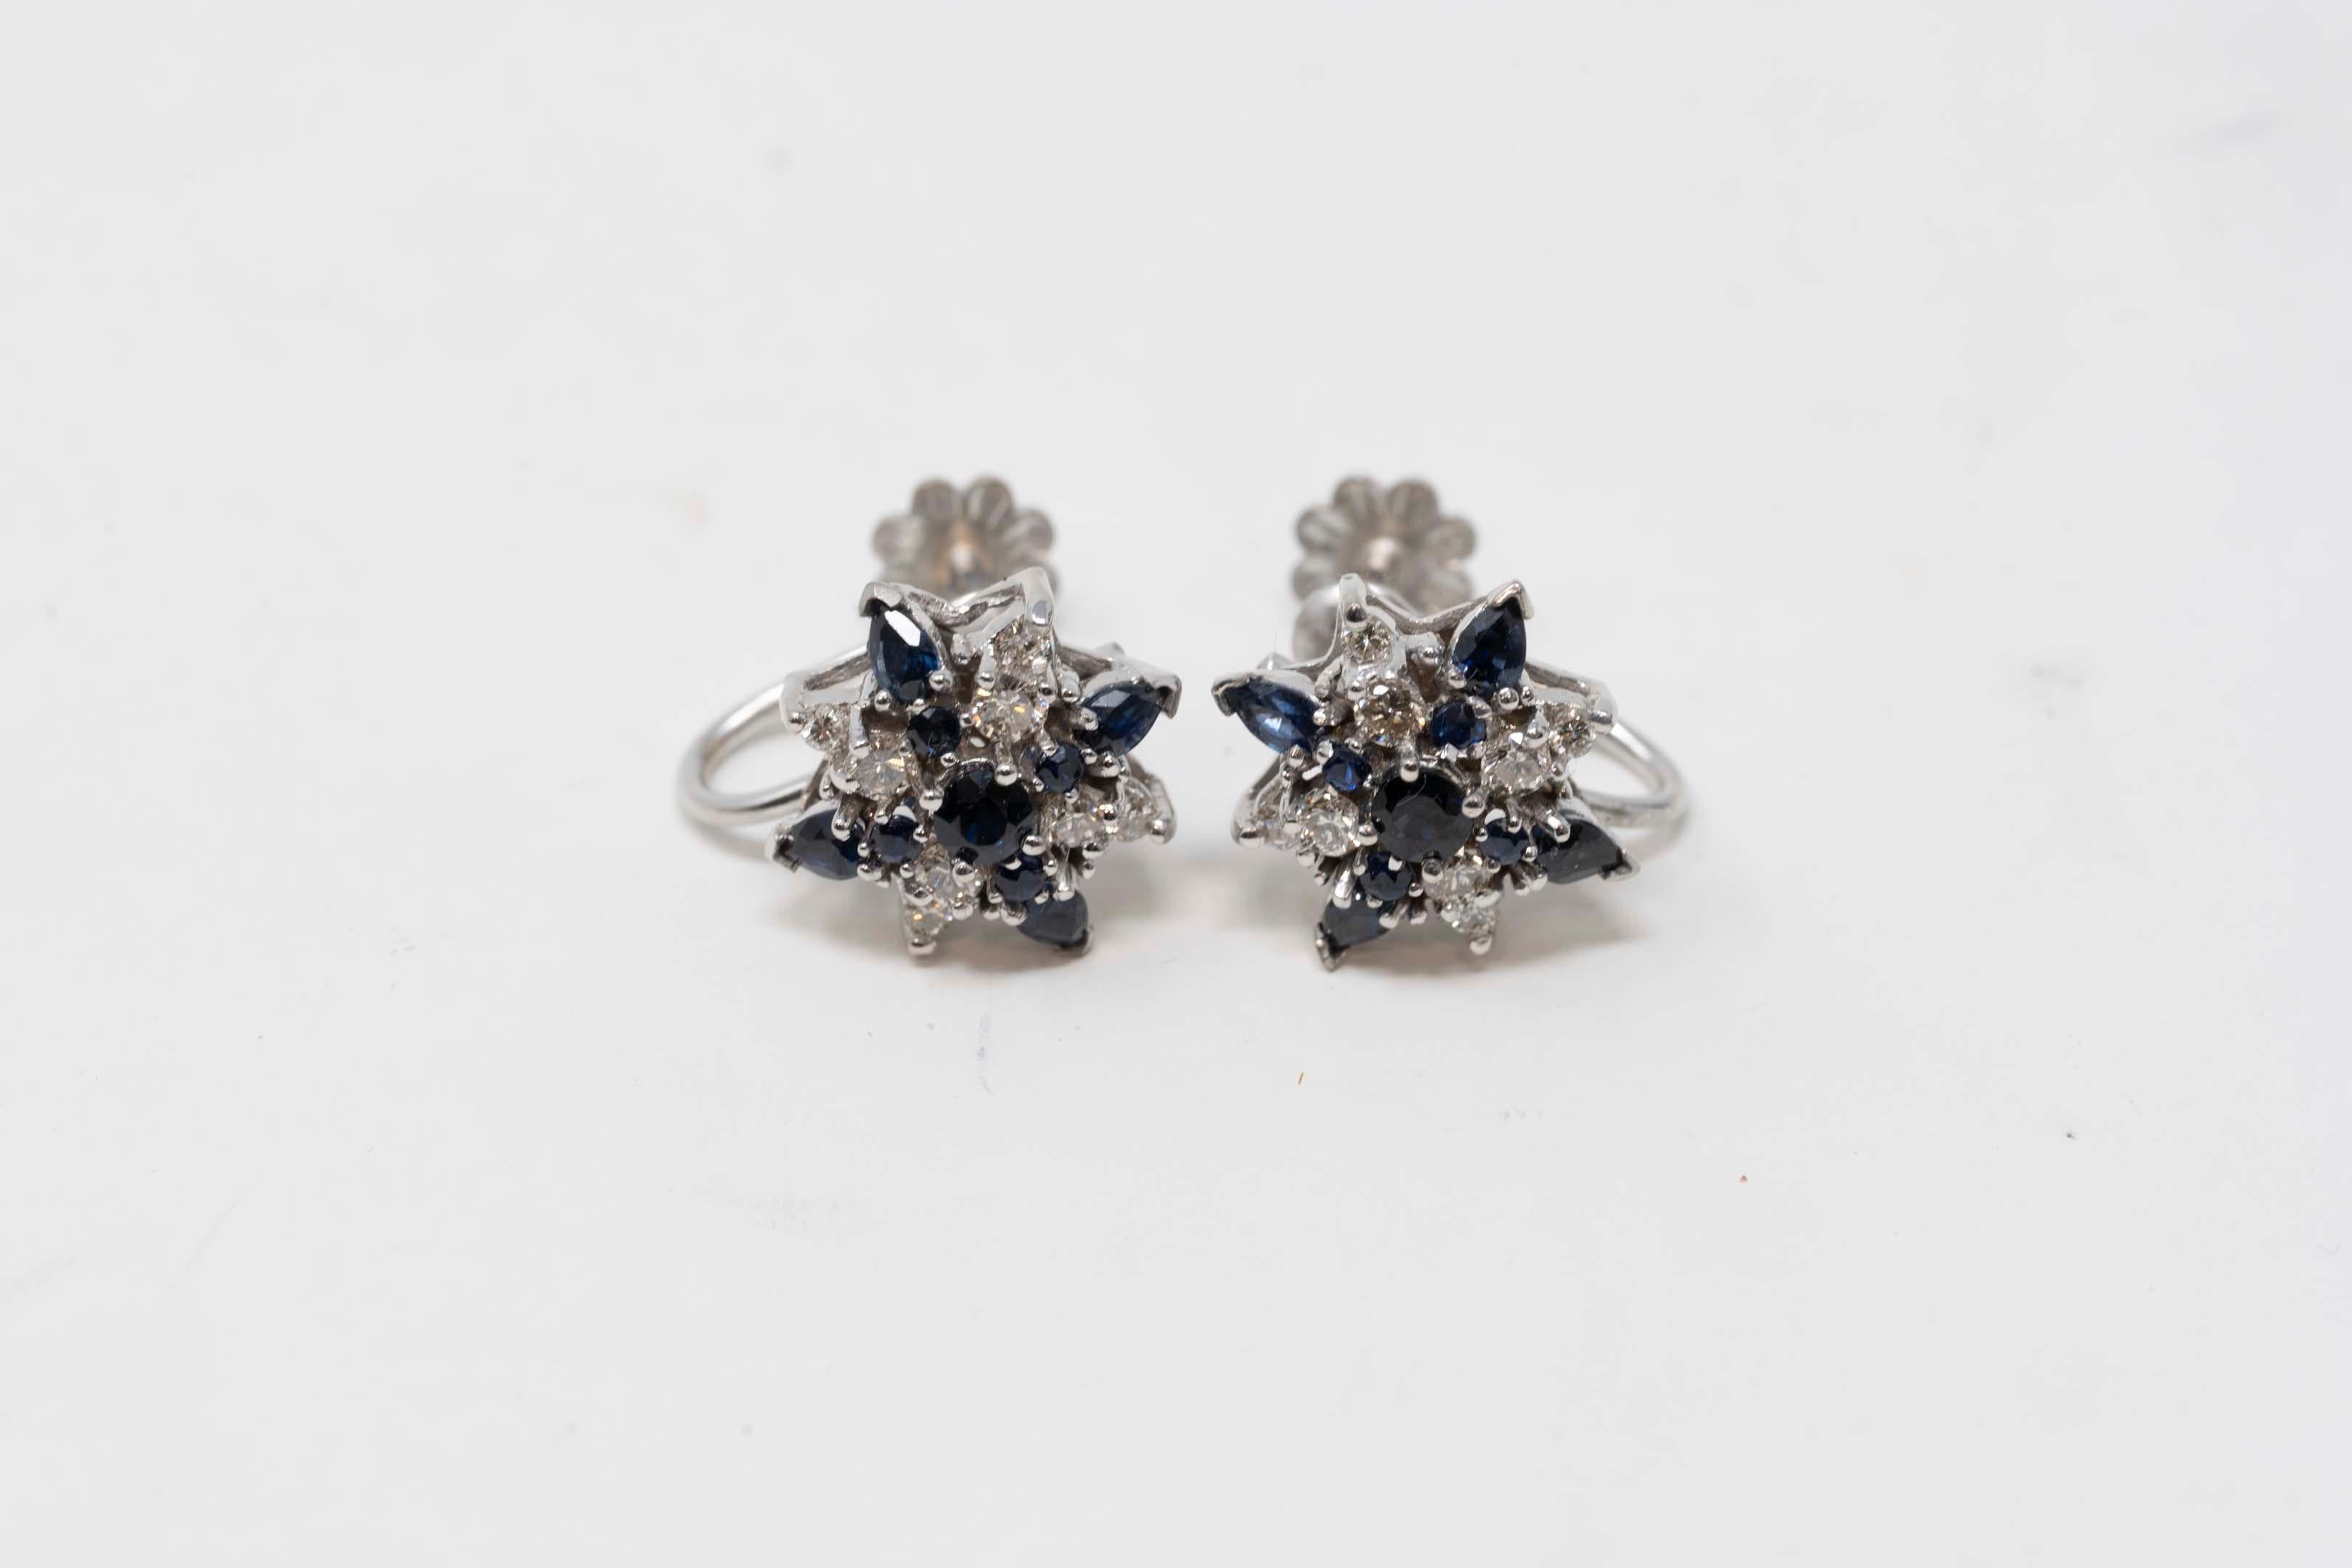 18k white gold screw back earrings, each one set with 5 round sapphires and 4 marquises plus 8 round diamonds from 0.01 ct to 0.05 ct (total .15ct each earring). Stamped on the back FM 87, 18k 96. Made in the USA, 1987. In good condition, 4.8 grams.
